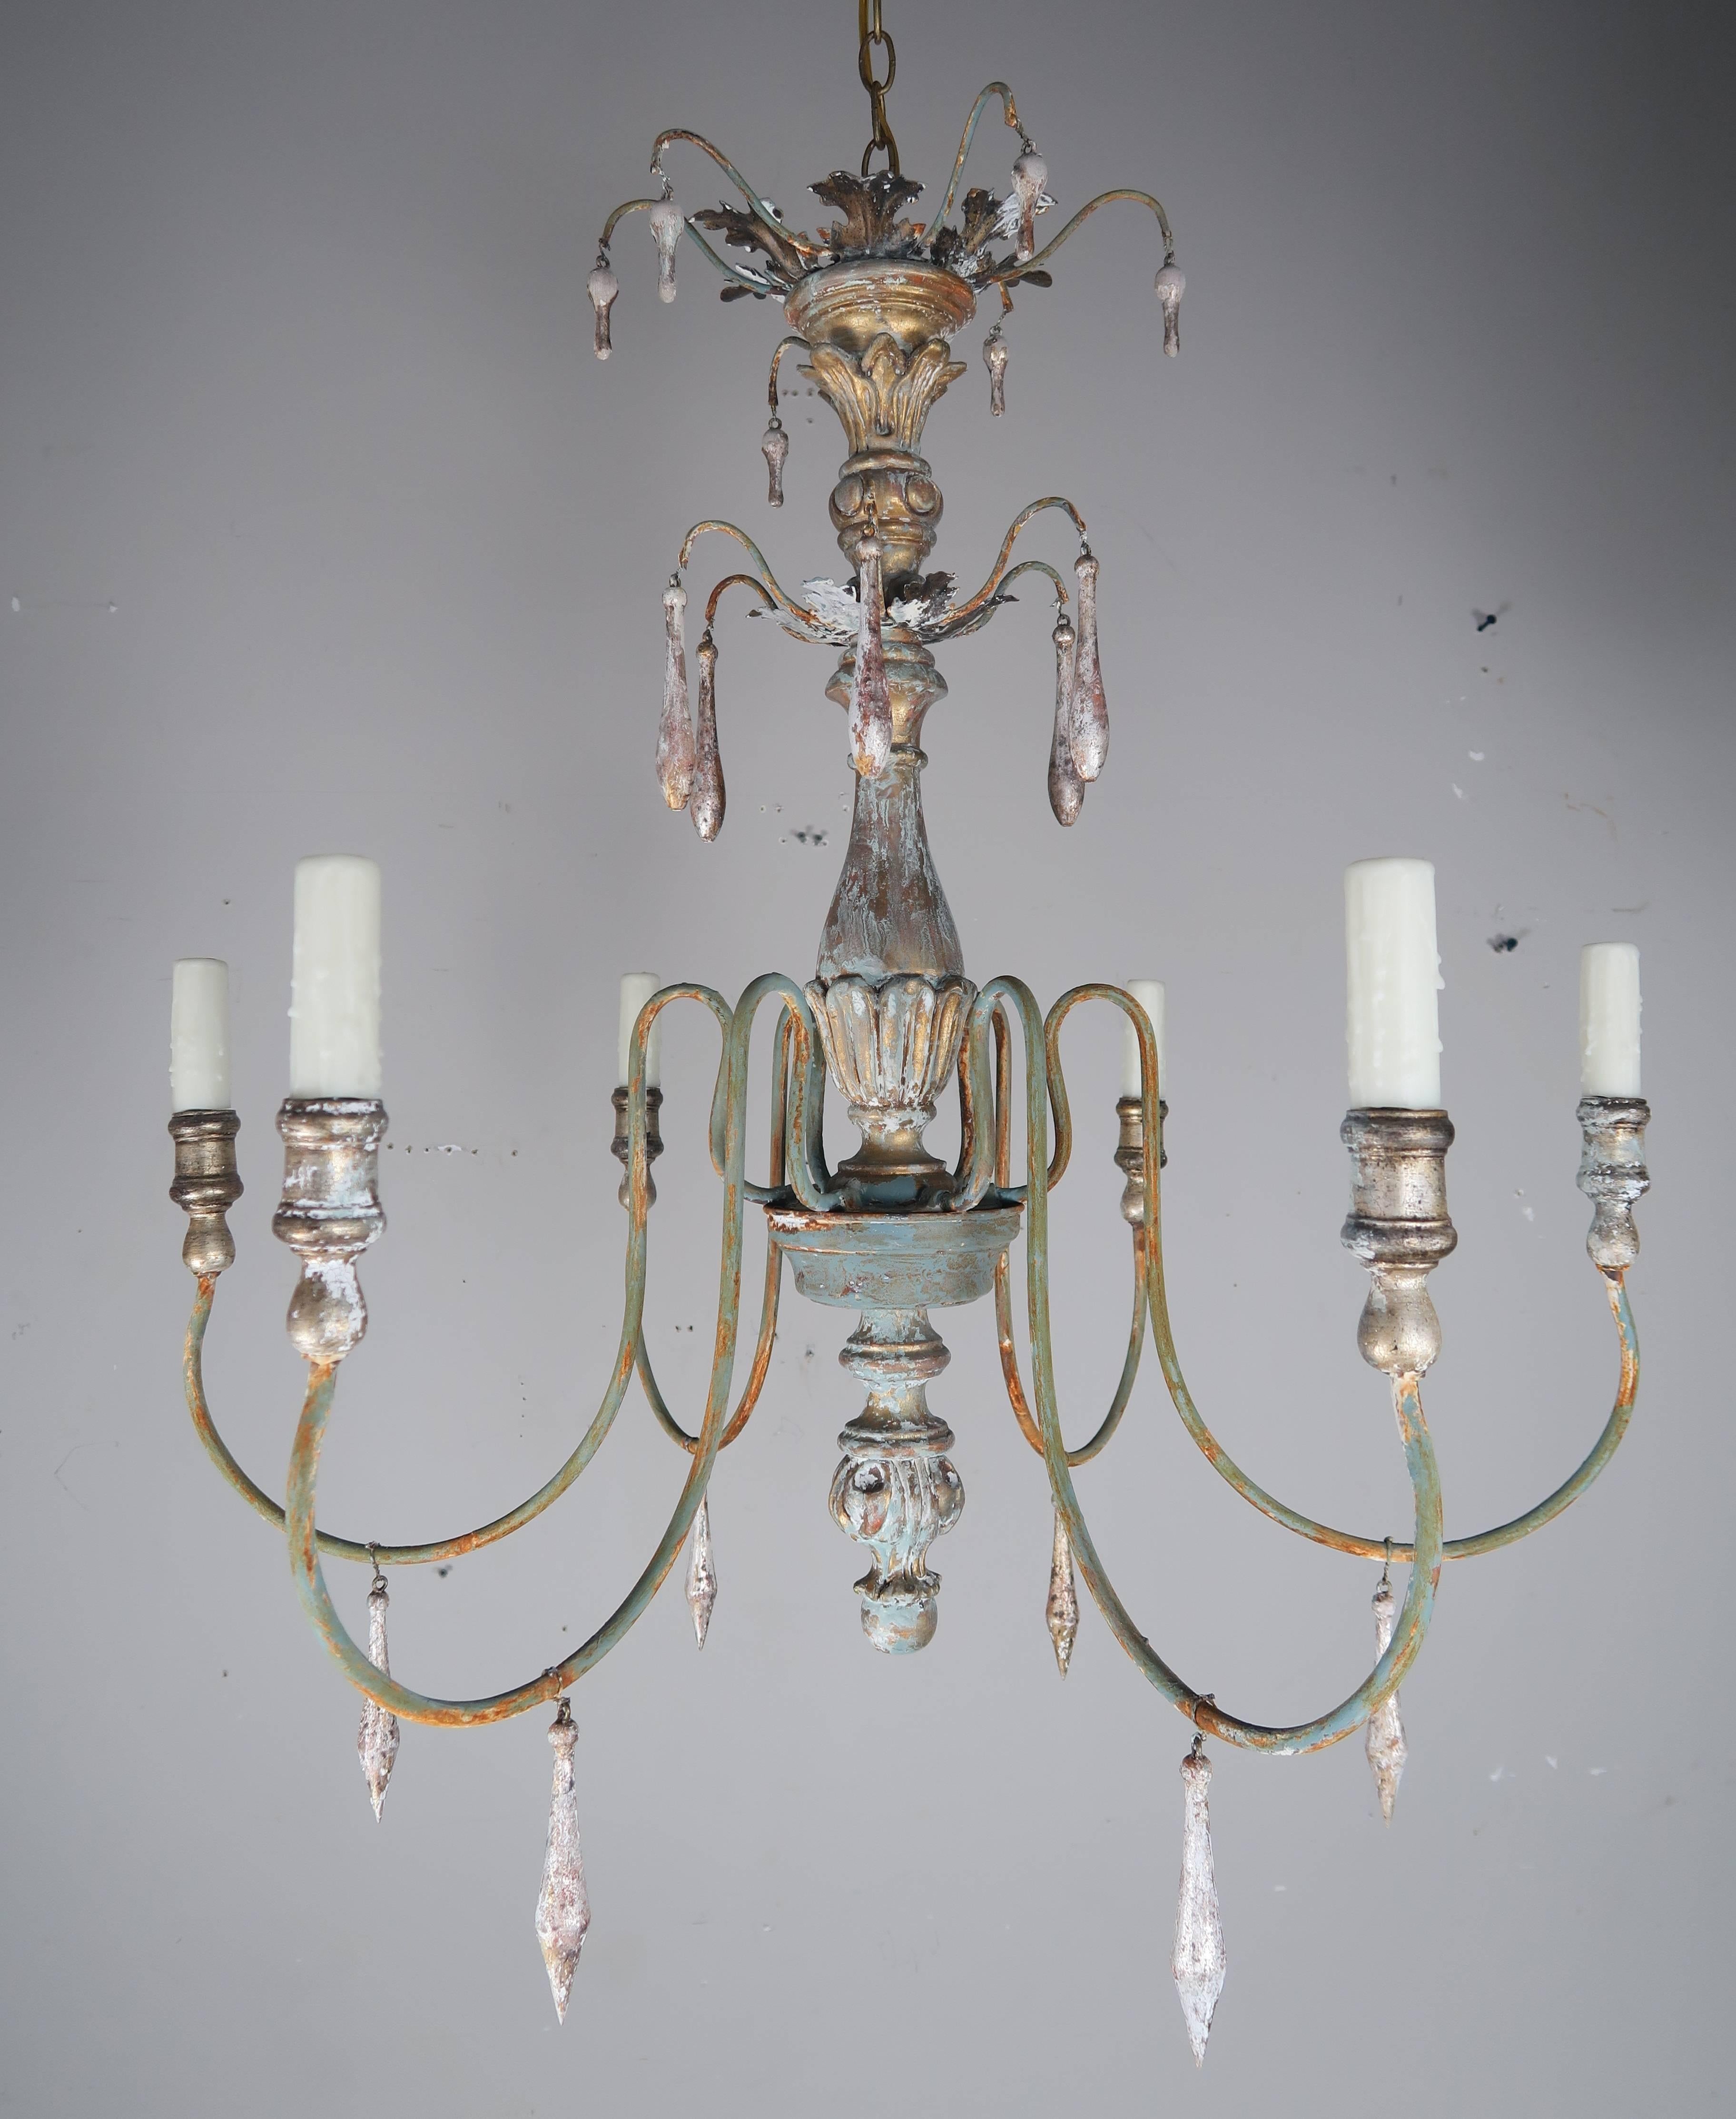 Hand-Painted Painted Six-Light Italian Chandelier with Wood Tassels